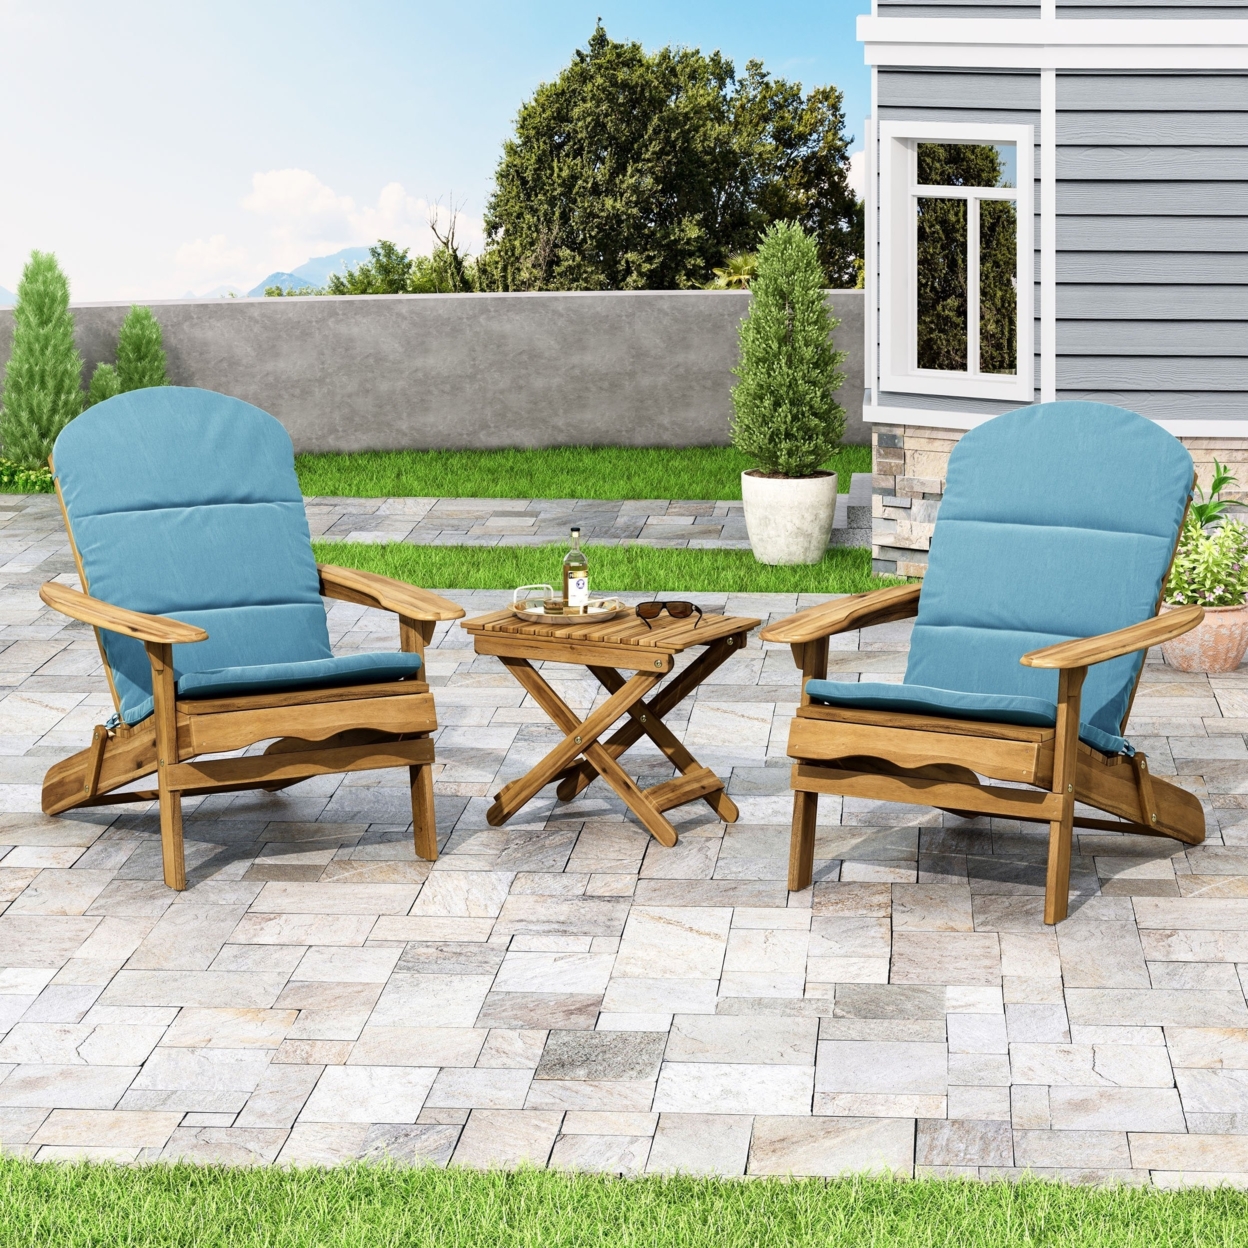 Reed Outdoor 2 Seater Acacia Wood Chat Set With Water Resistant Cushions - Gray/gray